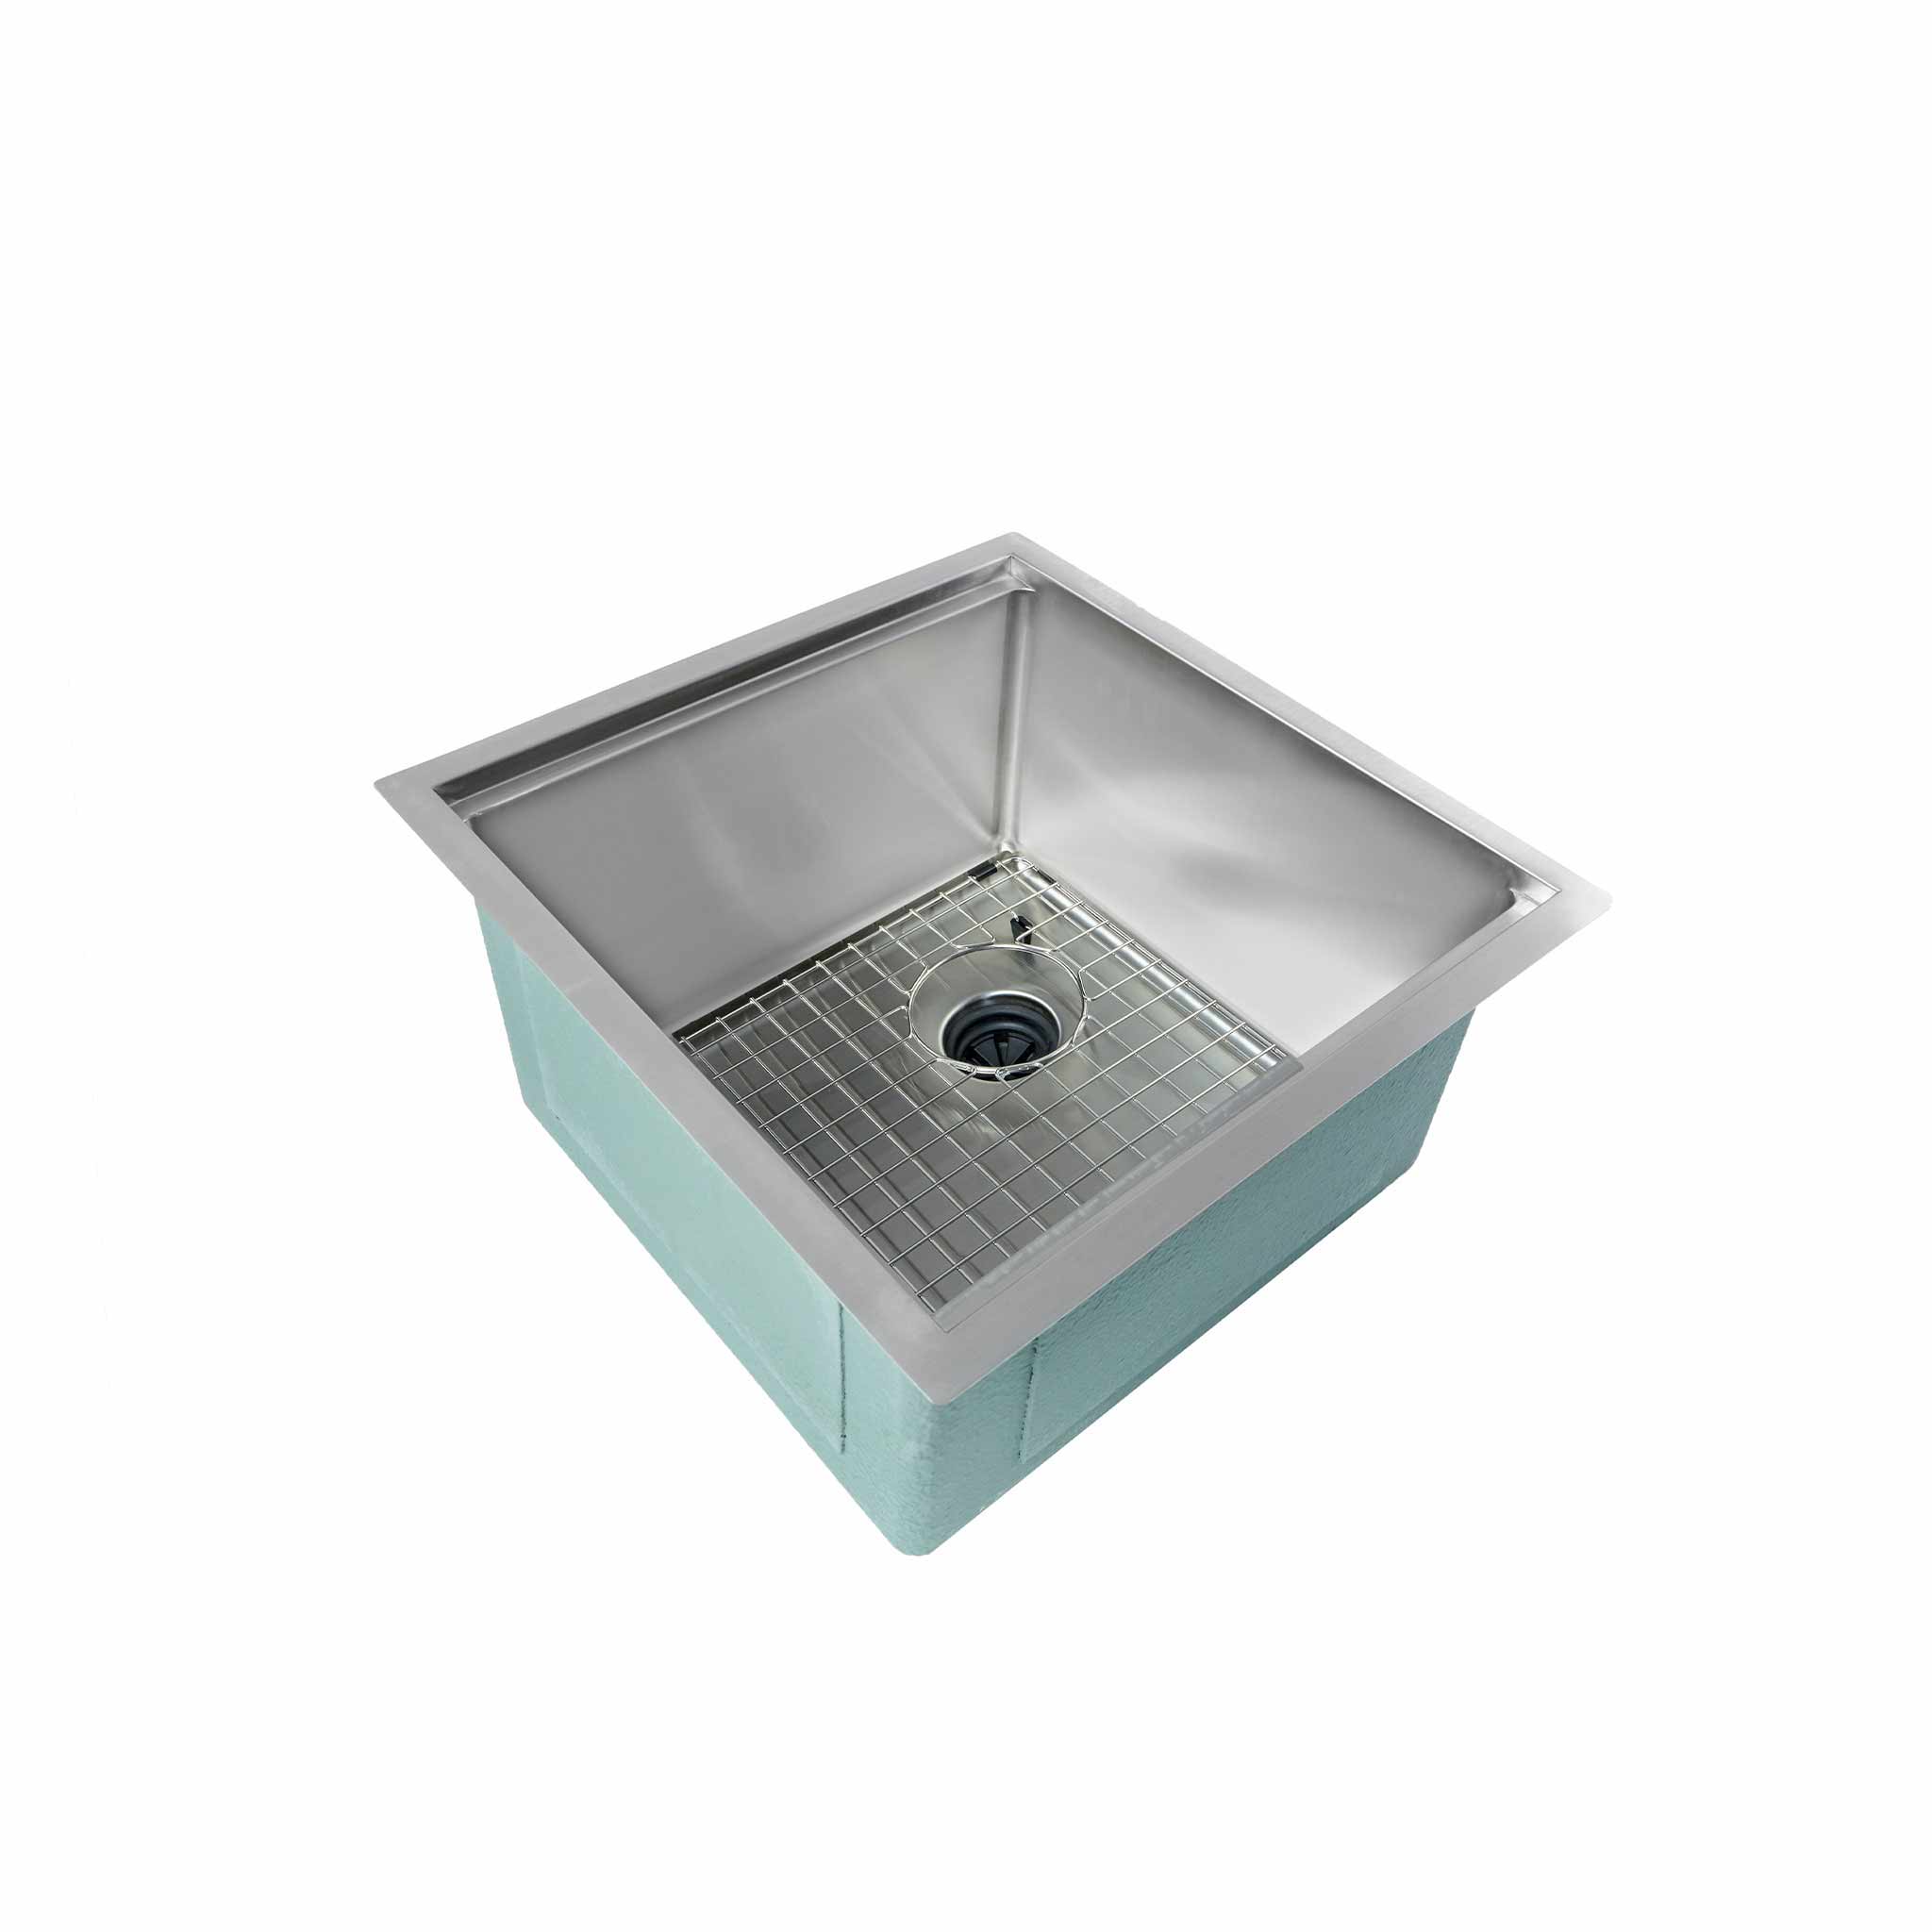 19”, Prep Kitchen Sink with basin-protecting stainless steel sink grid.